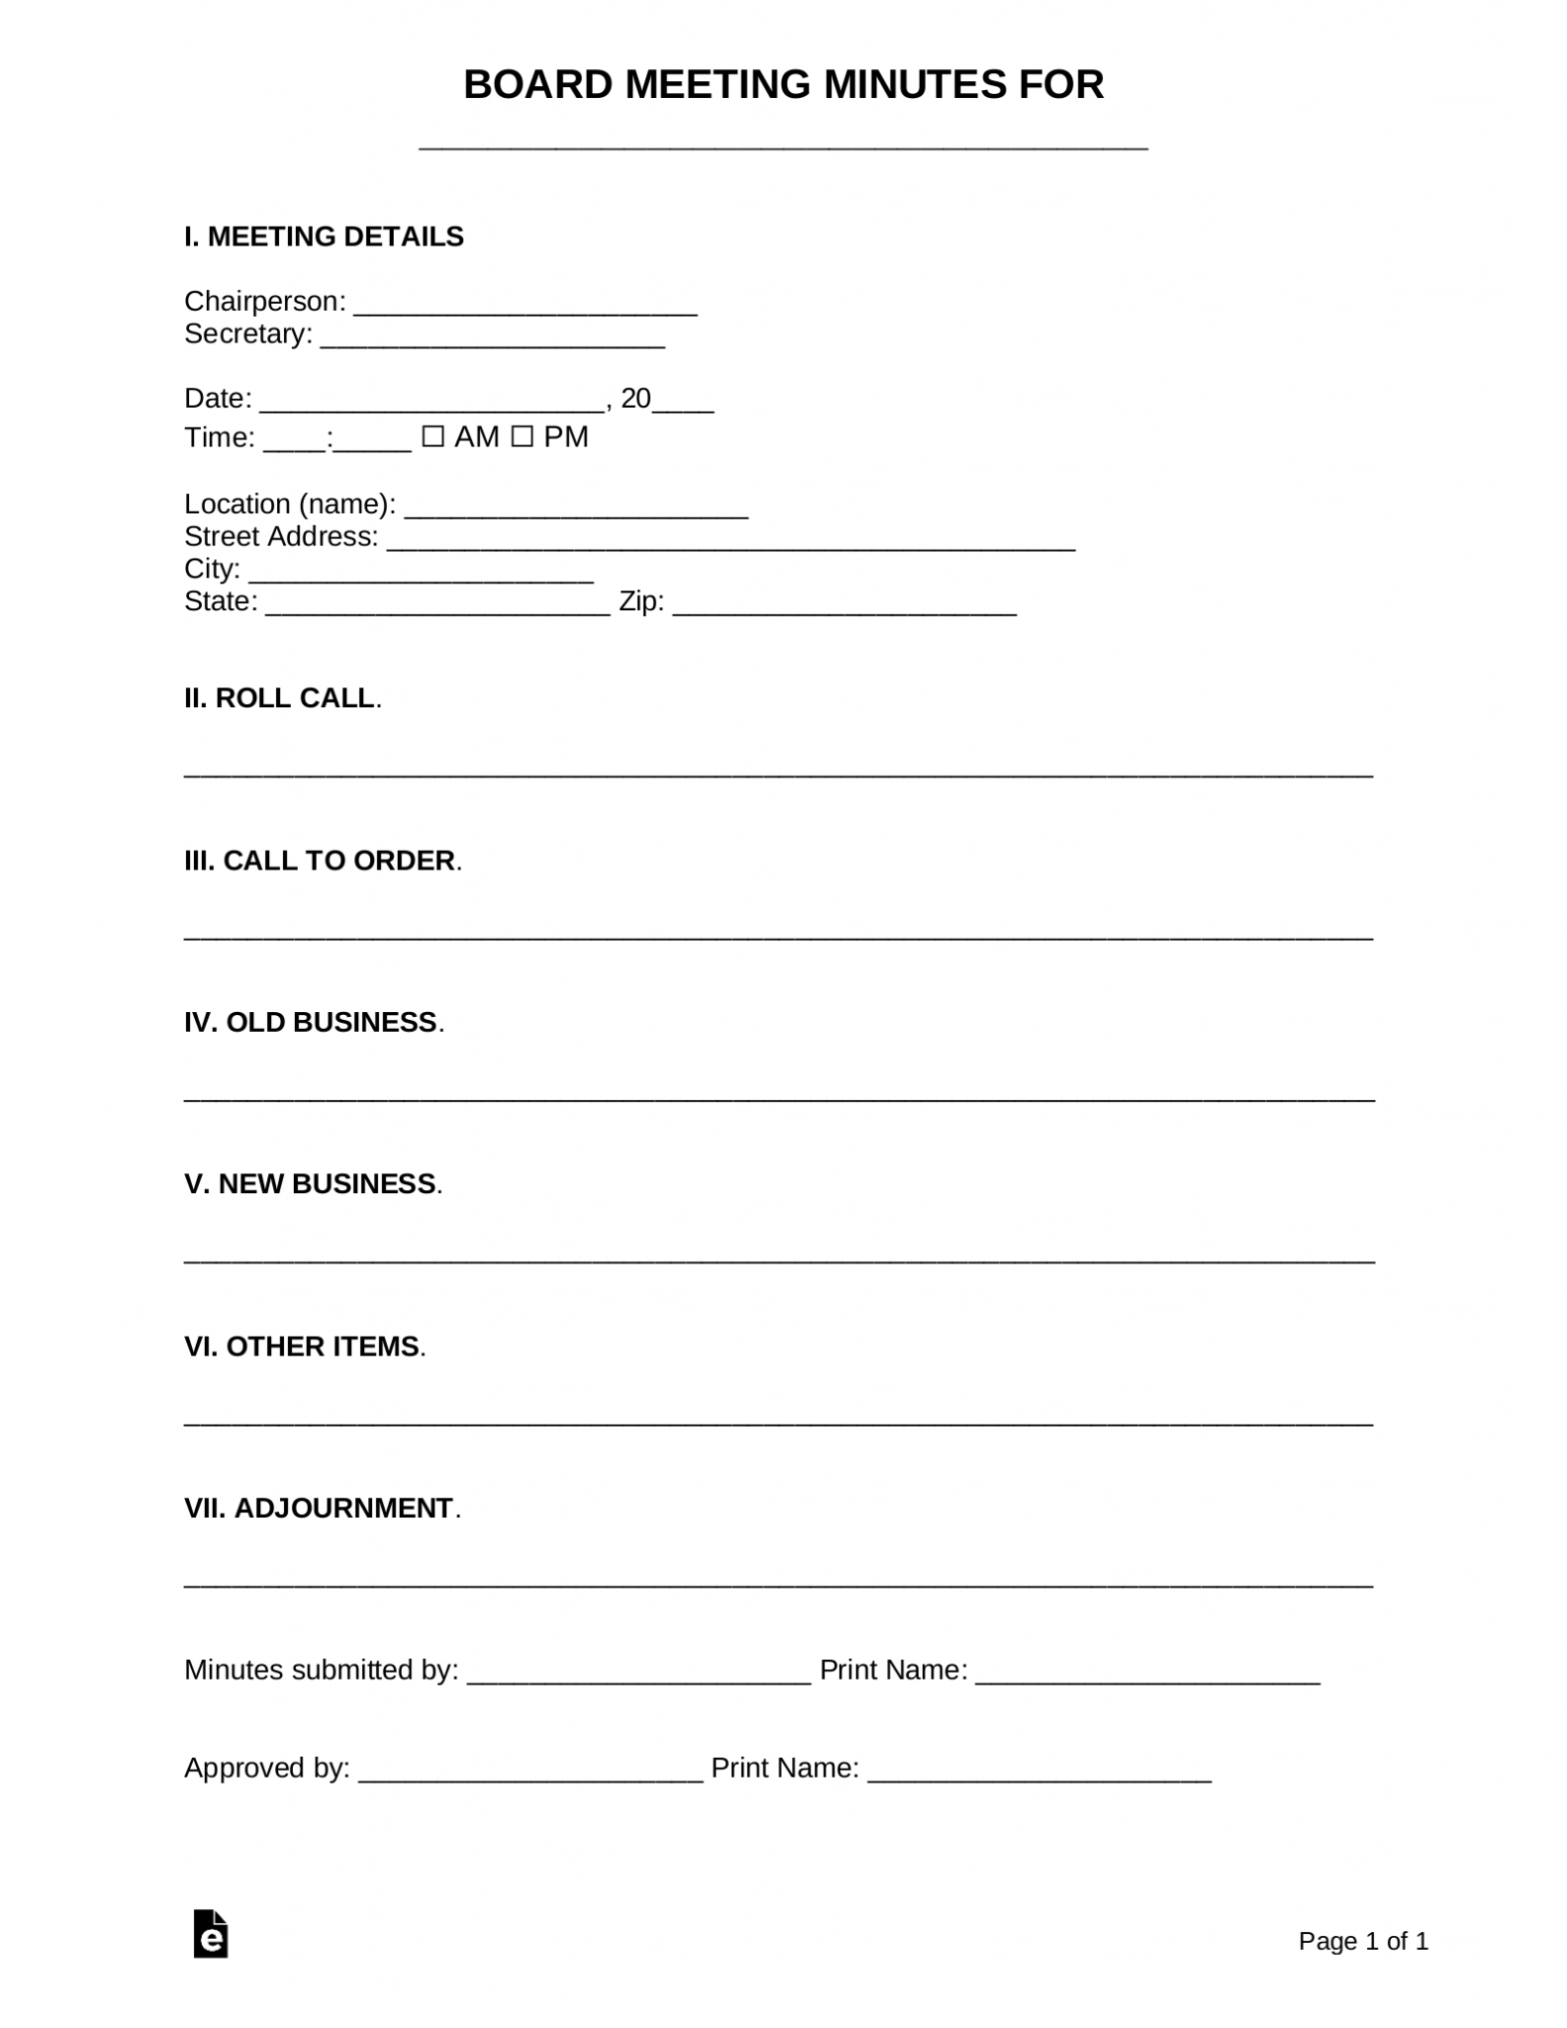 Free Board Meeting Minutes Template | Sample - Pdf | Word - Eforms Intended For Template For Meeting Notes